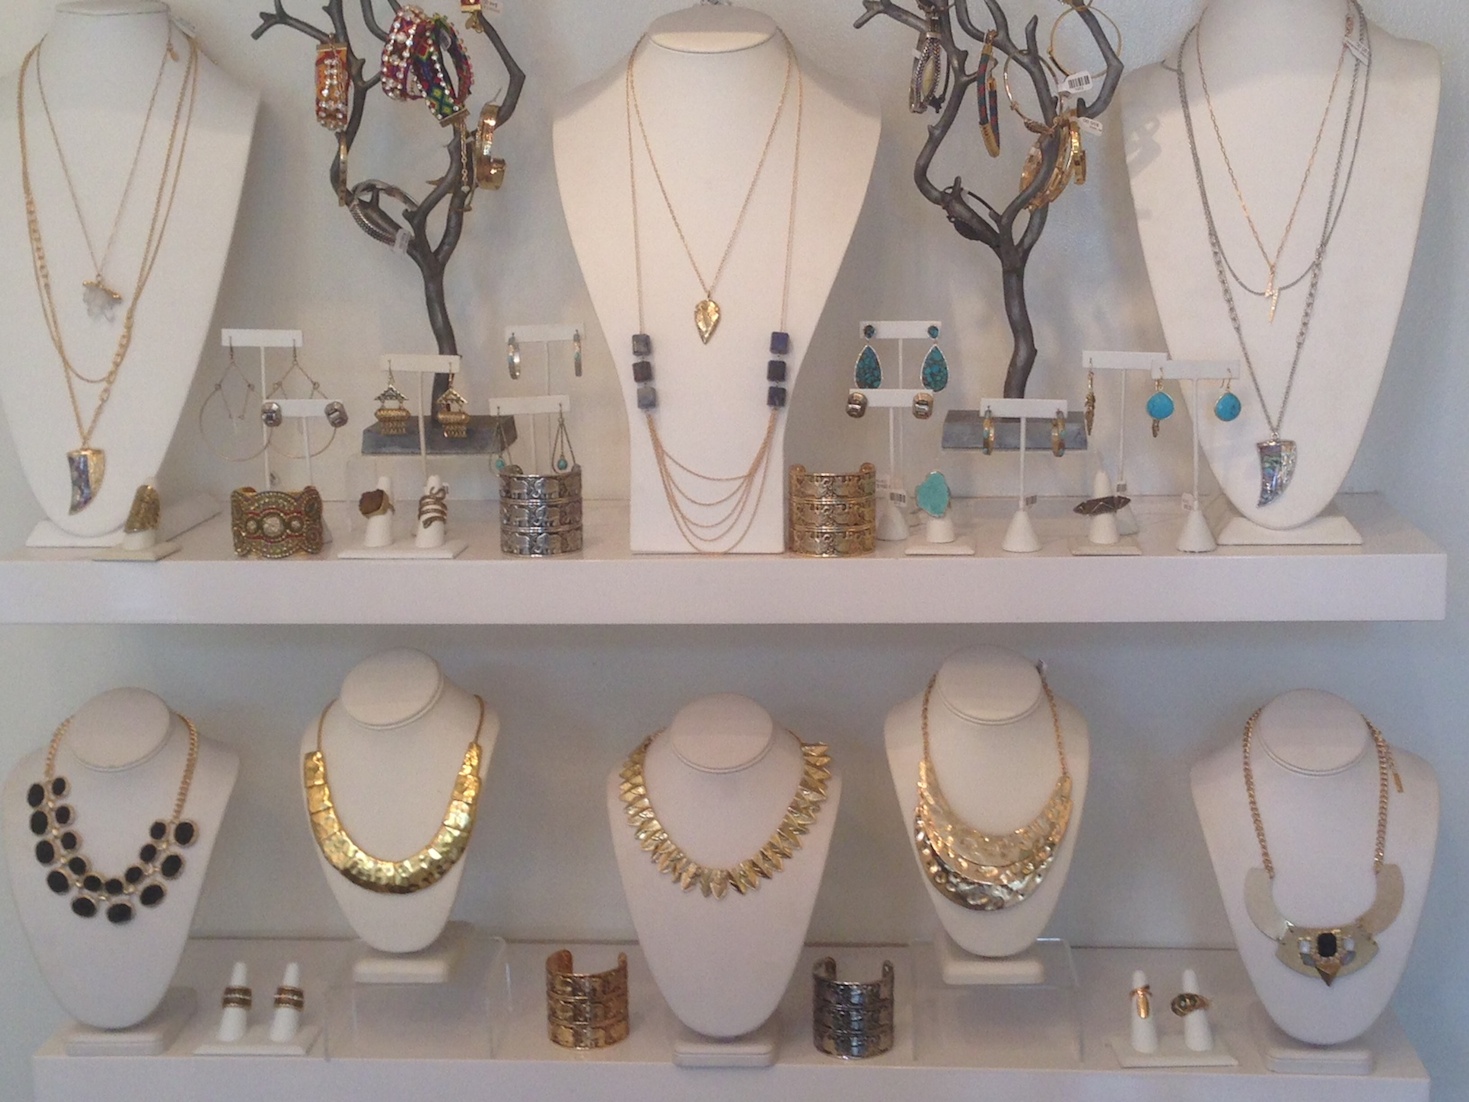 Necklaces at Charm at 2910 M St. NW in Georgetown